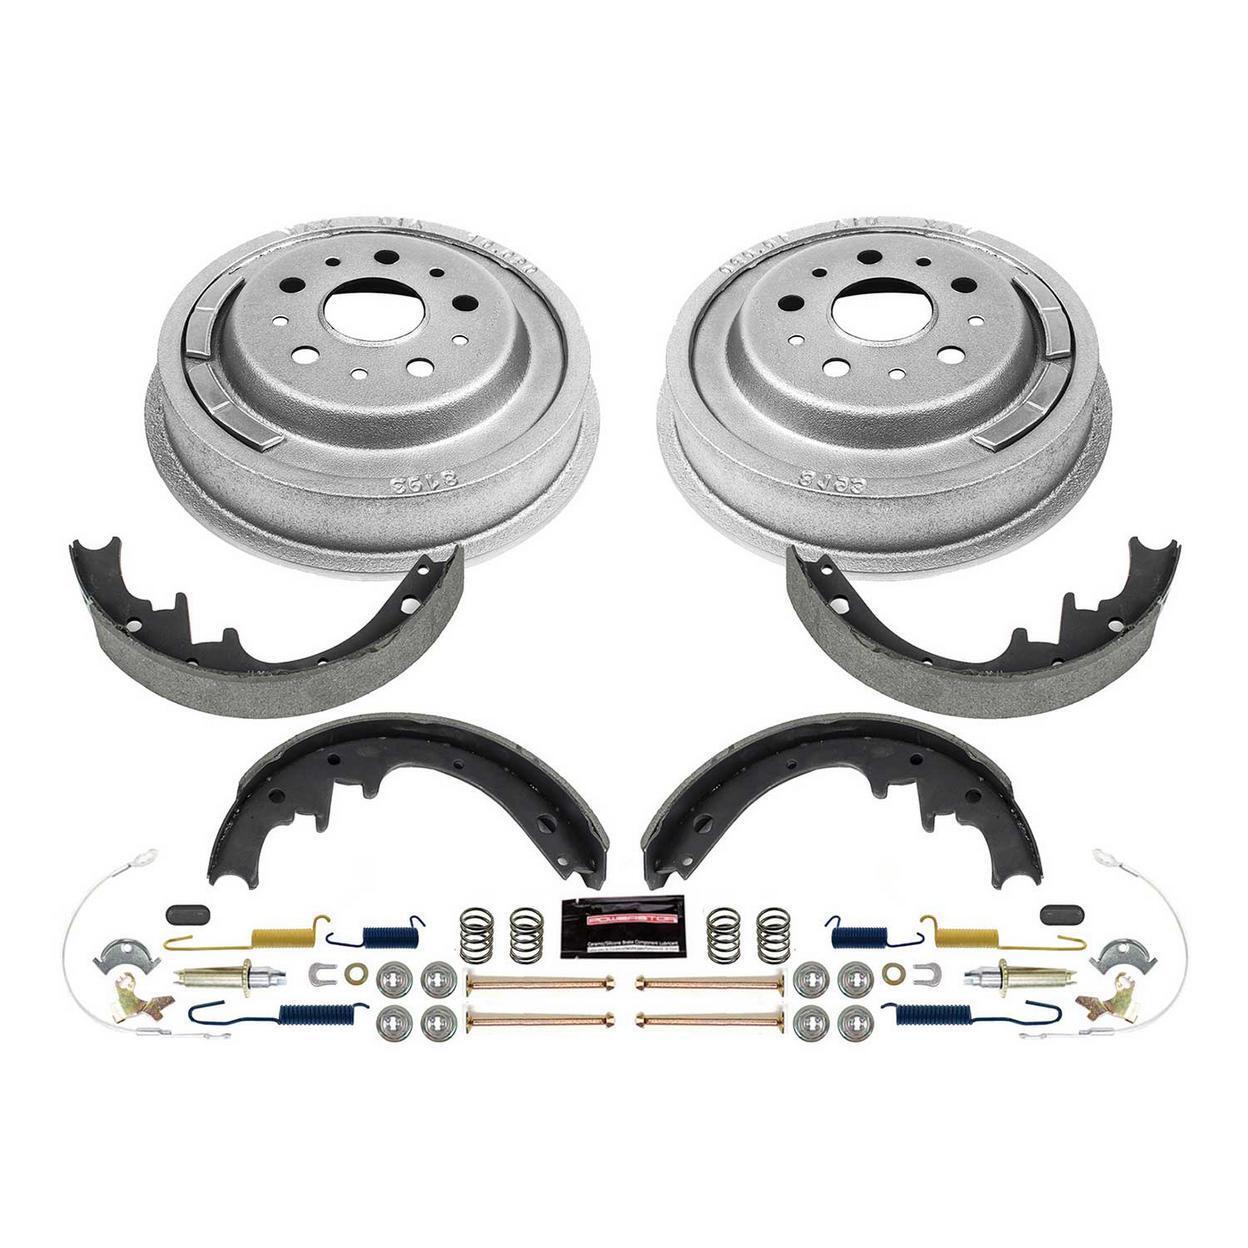 PowerStop OE Stock Replacement Drum + Shoe Kit Fits 1964 Mercury Cyclone